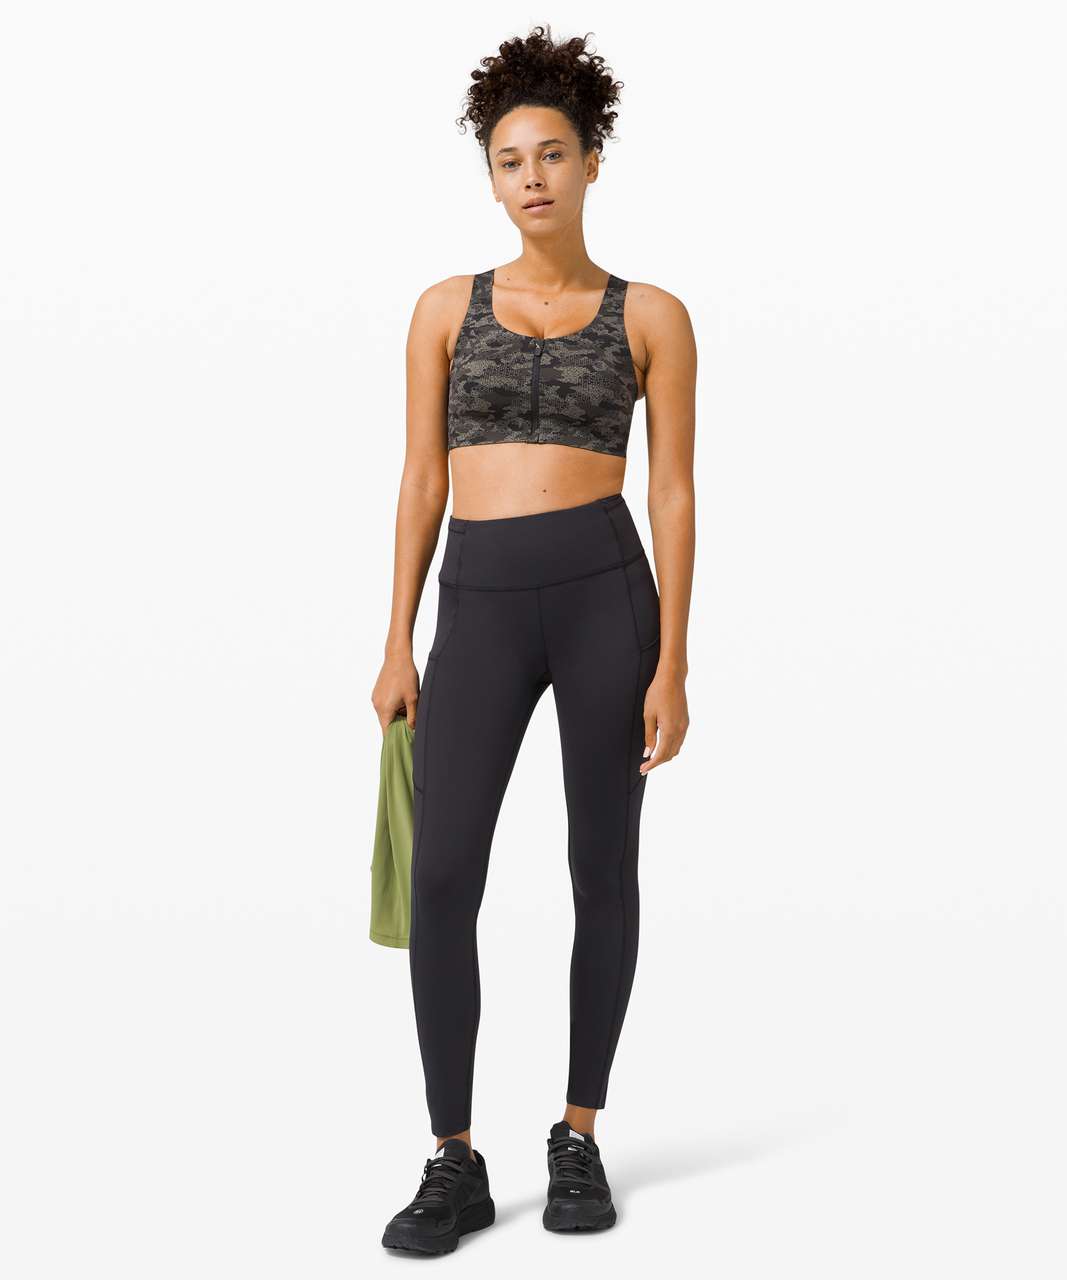 Lululemon Enlite Bra: Free To Move - Teach Me Style - A style, beauty and  life blog.